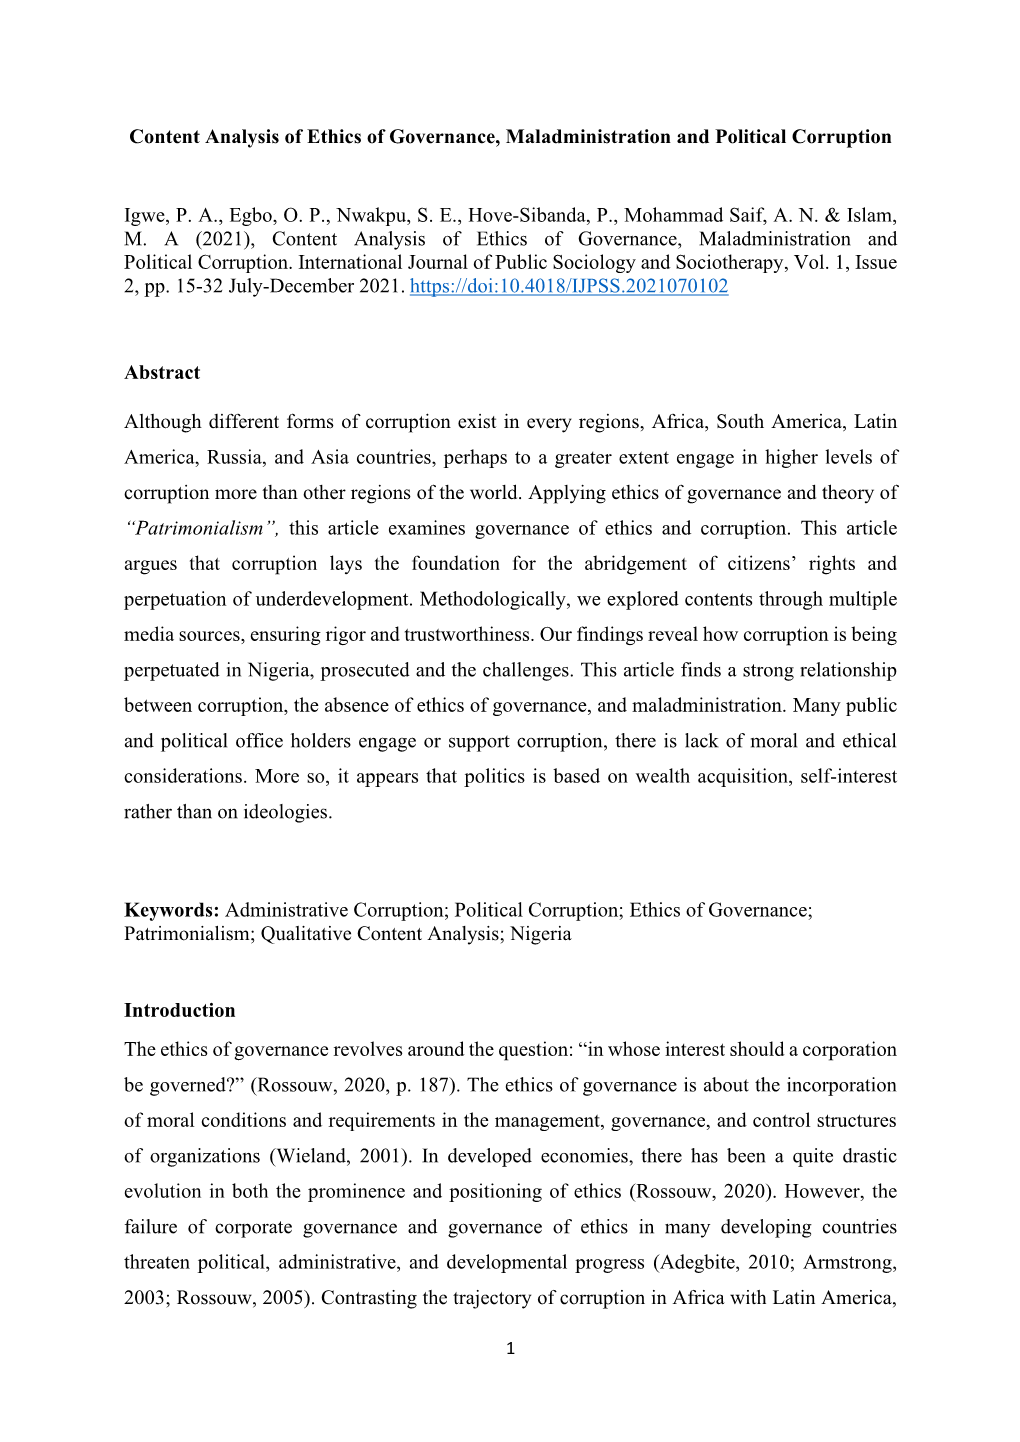 Content Analysis of Ethics of Governance, Maladministration and Political Corruption Igwe, P. A., Egbo, O. P., Nwakpu, S. E., Ho